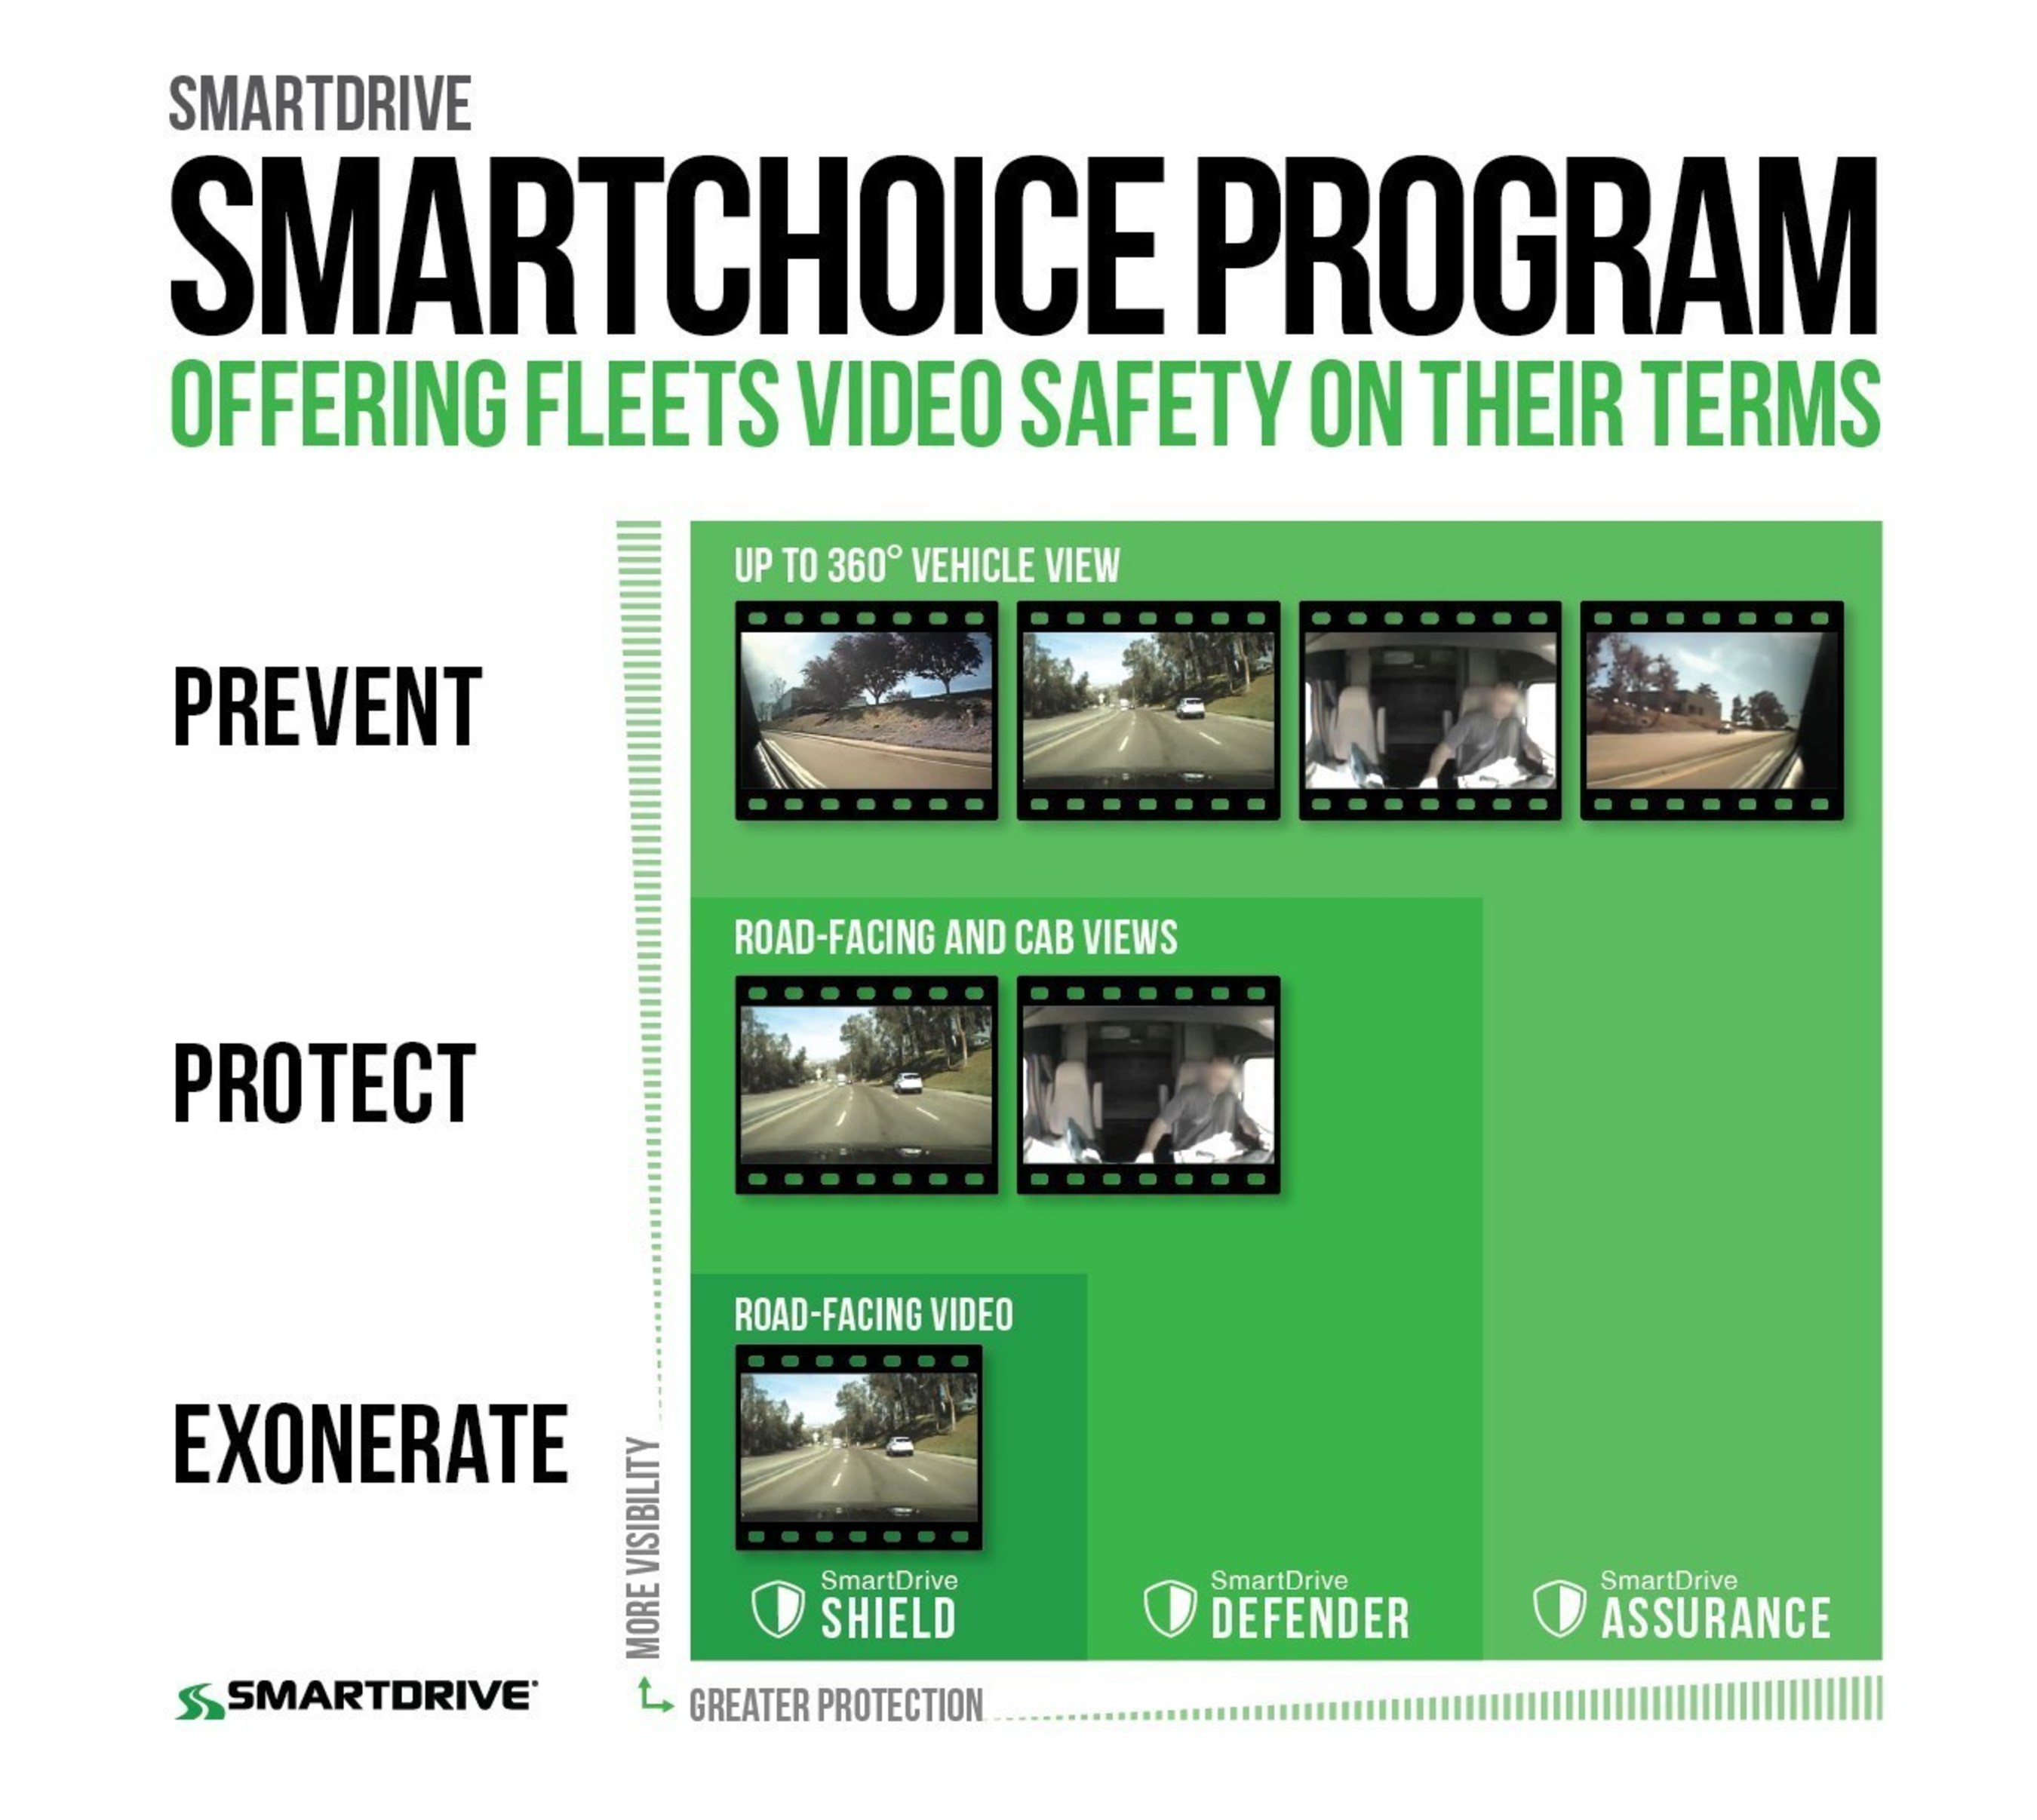 The SmartDrive SmartChoice Program offers fleets video safety on their terms.